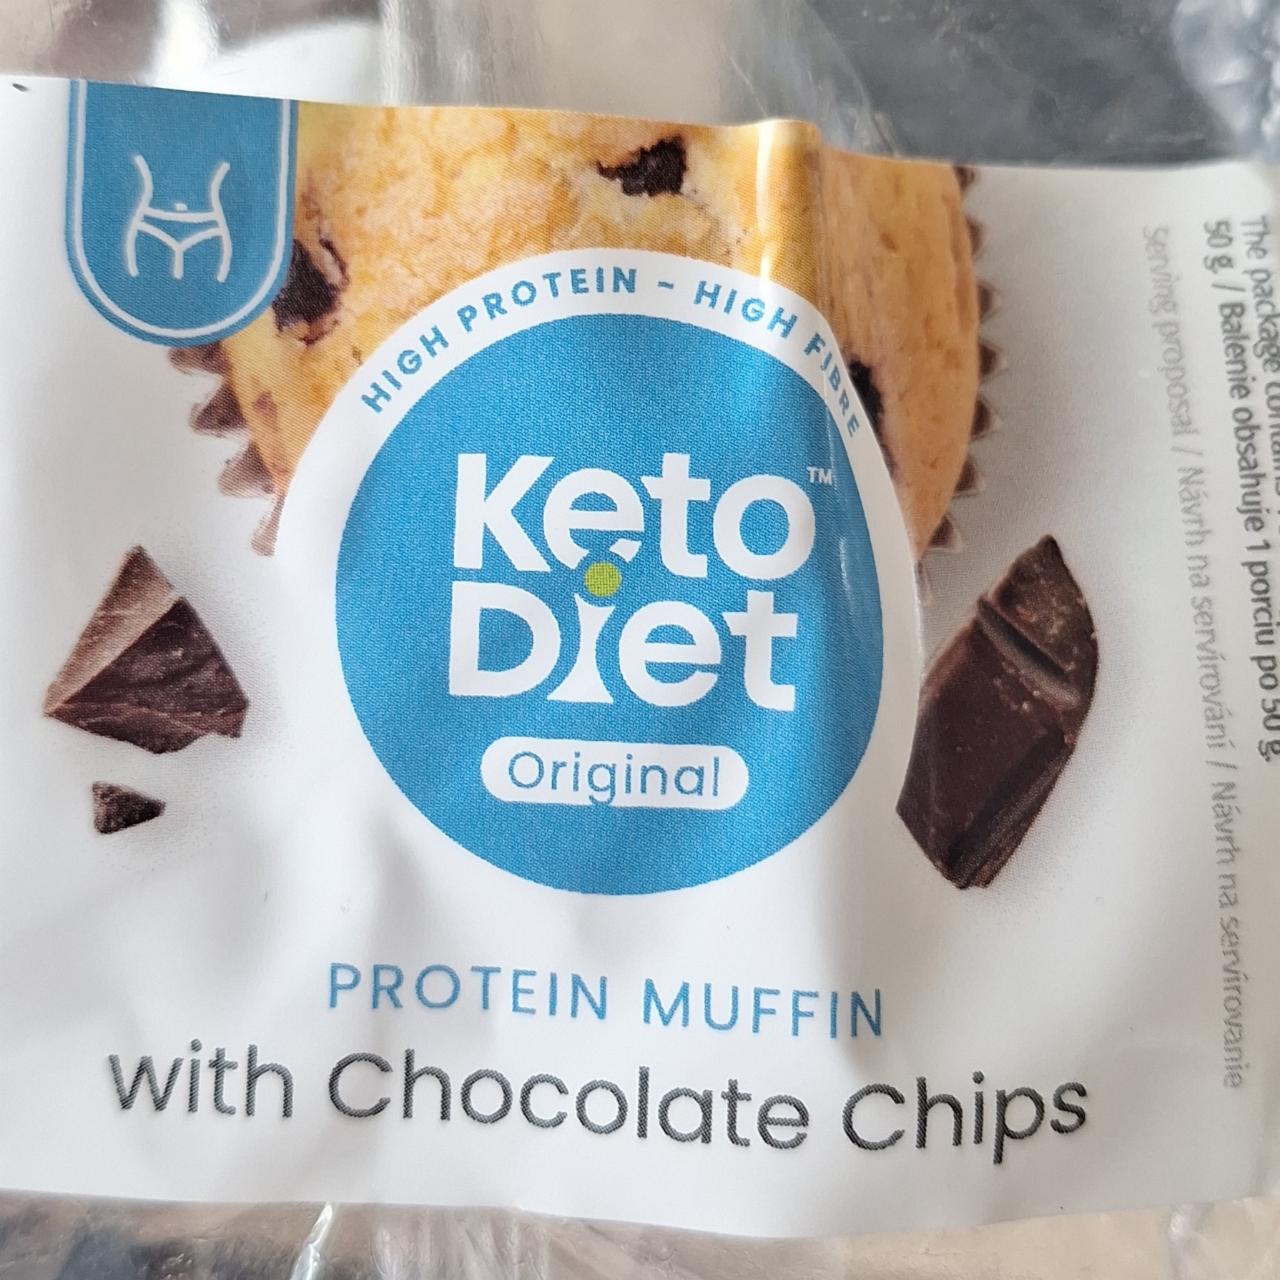 Fotografie - Protein Muffin with Chocolate Chips KetoDiet